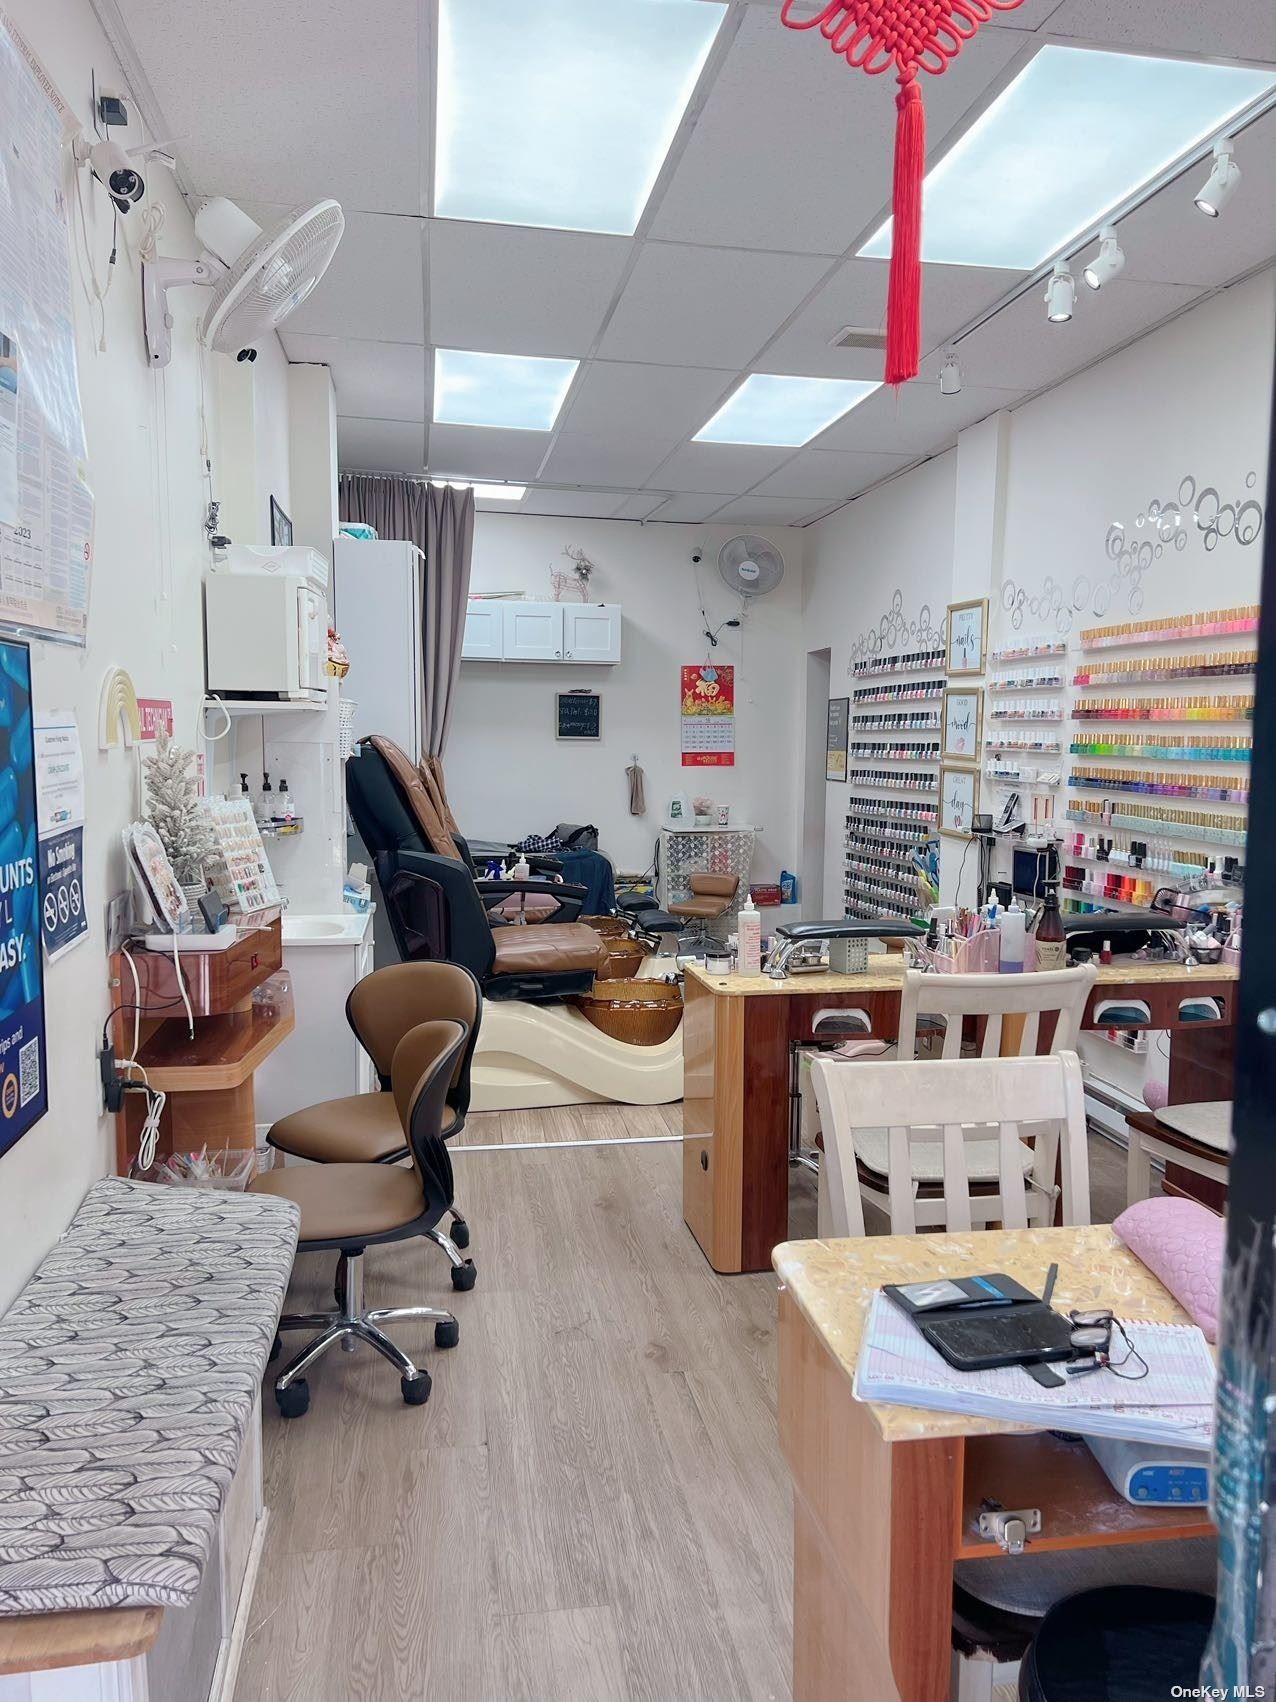 Business Opportunity in Bronx - Allerton  Bronx, NY 10467